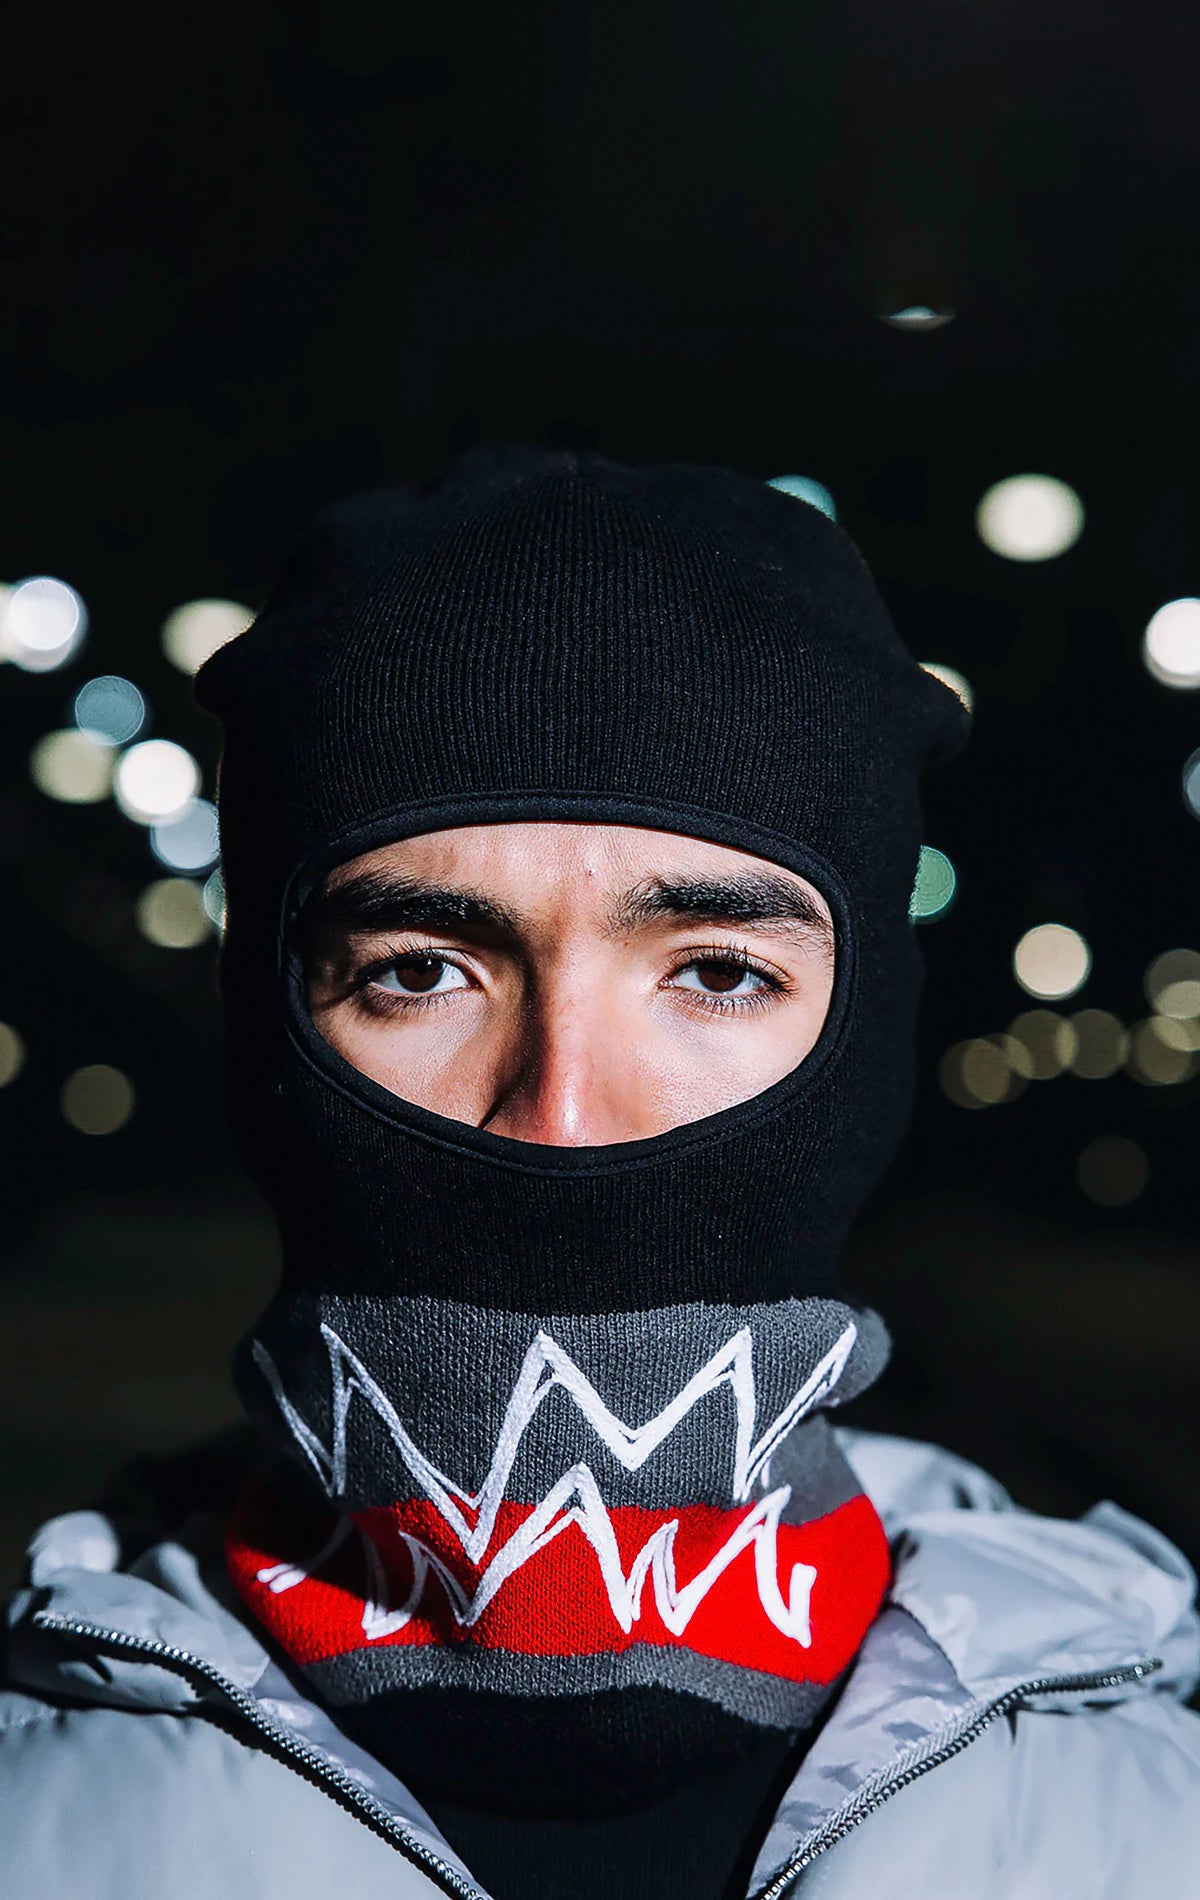 A stylish and warm limited-edition cozy ski mask featuring a soft and warm knitted construction, one-size-fits-all design, and perfect for winter outdoor activities.